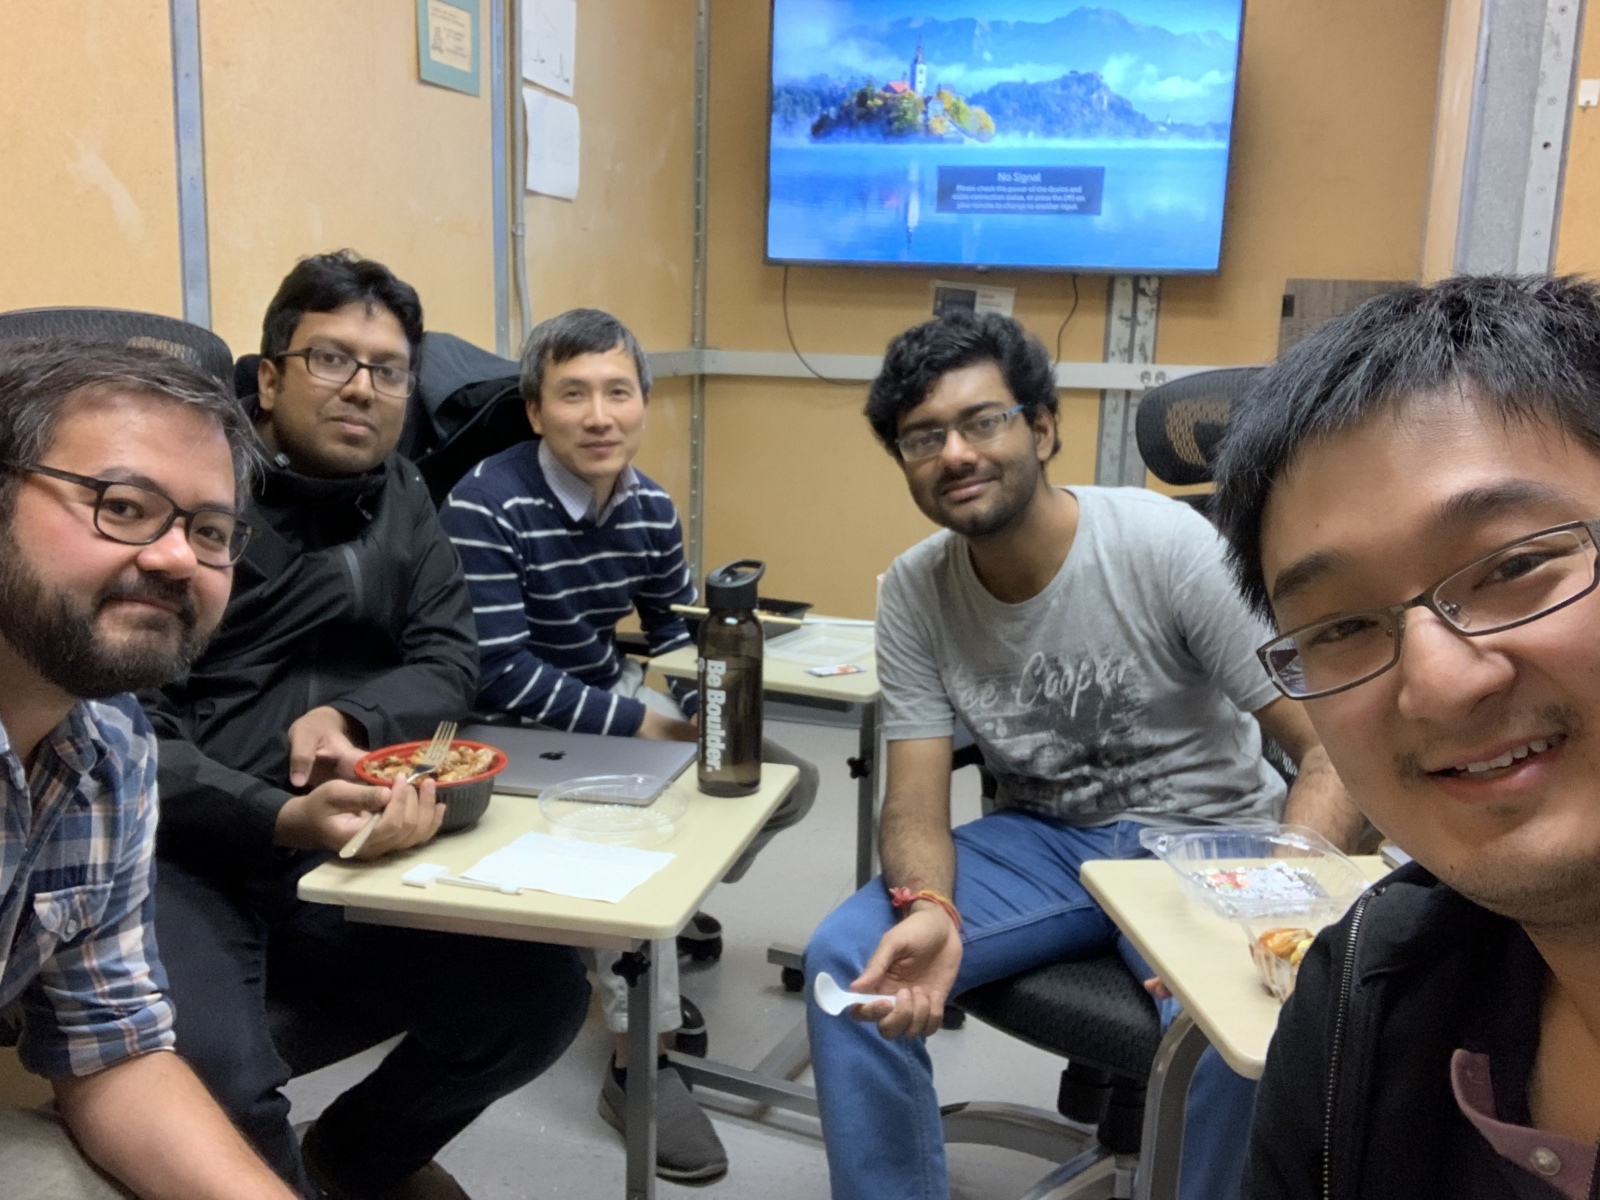 20191219 - First full group meeting in our lab - Casey, Ratul, Hanh-Phuc, Tirtho, Roger.